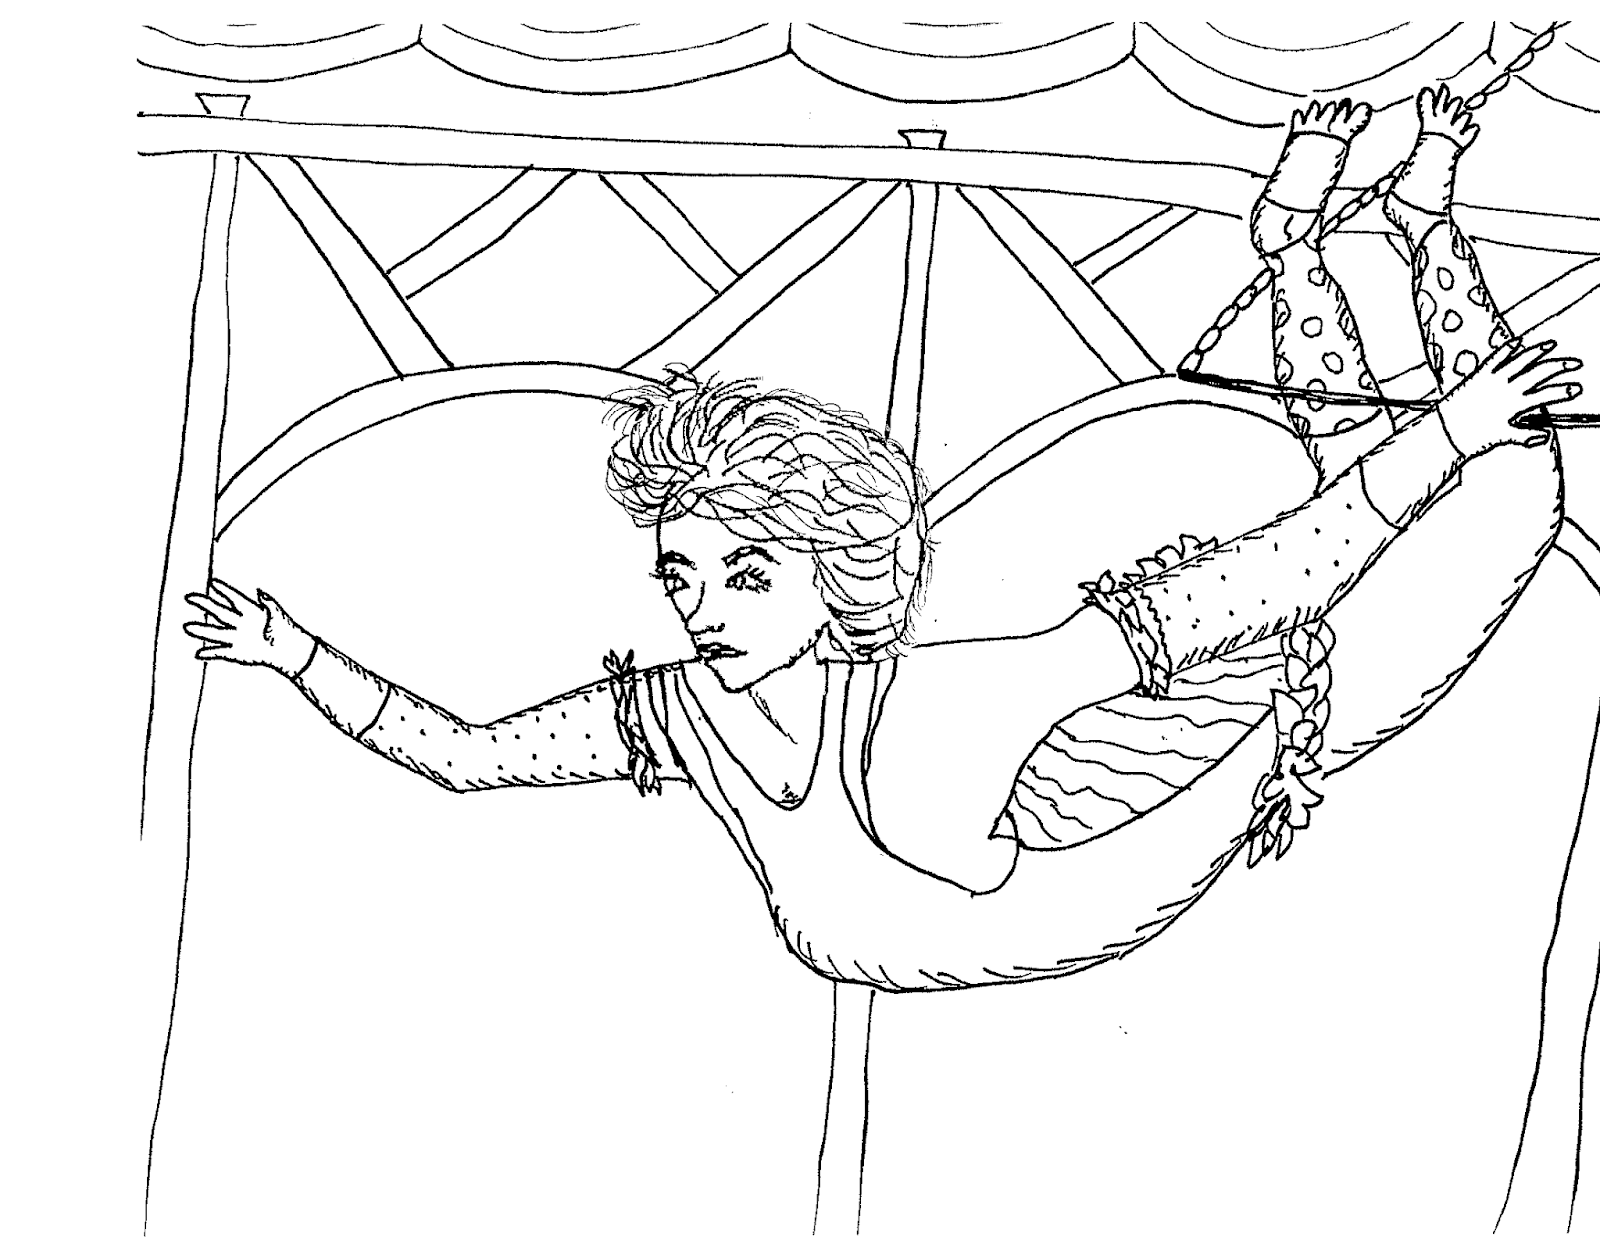 Robin's Great Coloring Pages: The Greatest Showman circus coloring pages